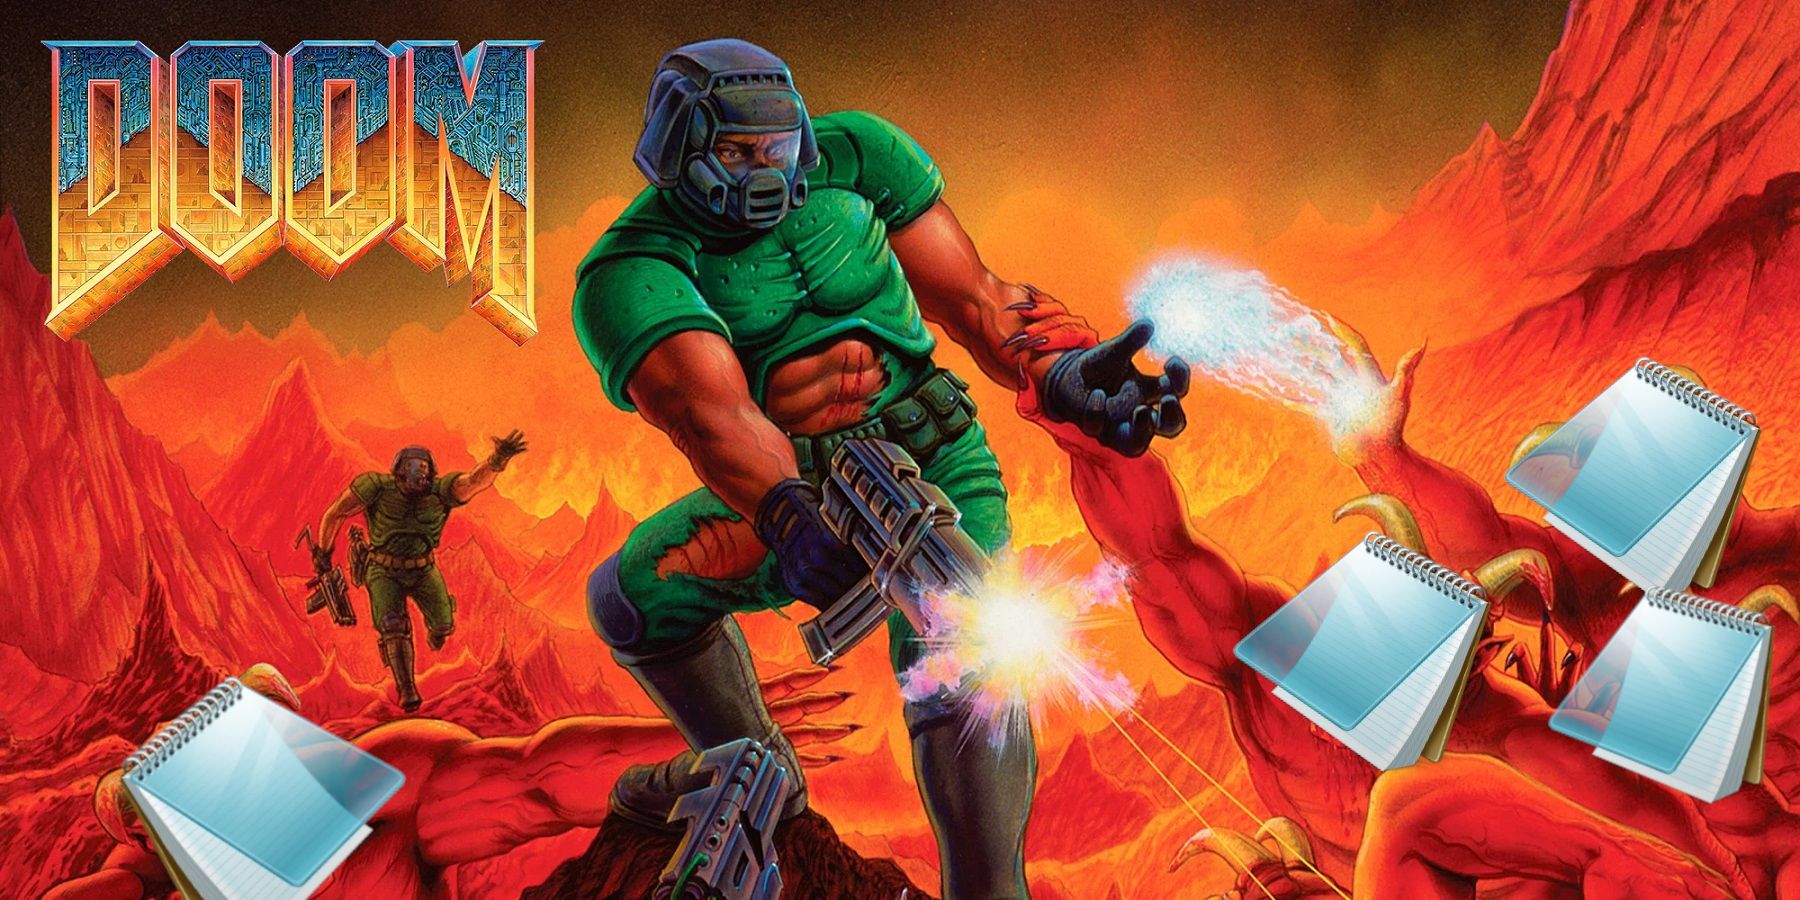 Boxart for the original Doom showing the Doomguy shooting at demons that have Microsoft Notepad icons for faces.